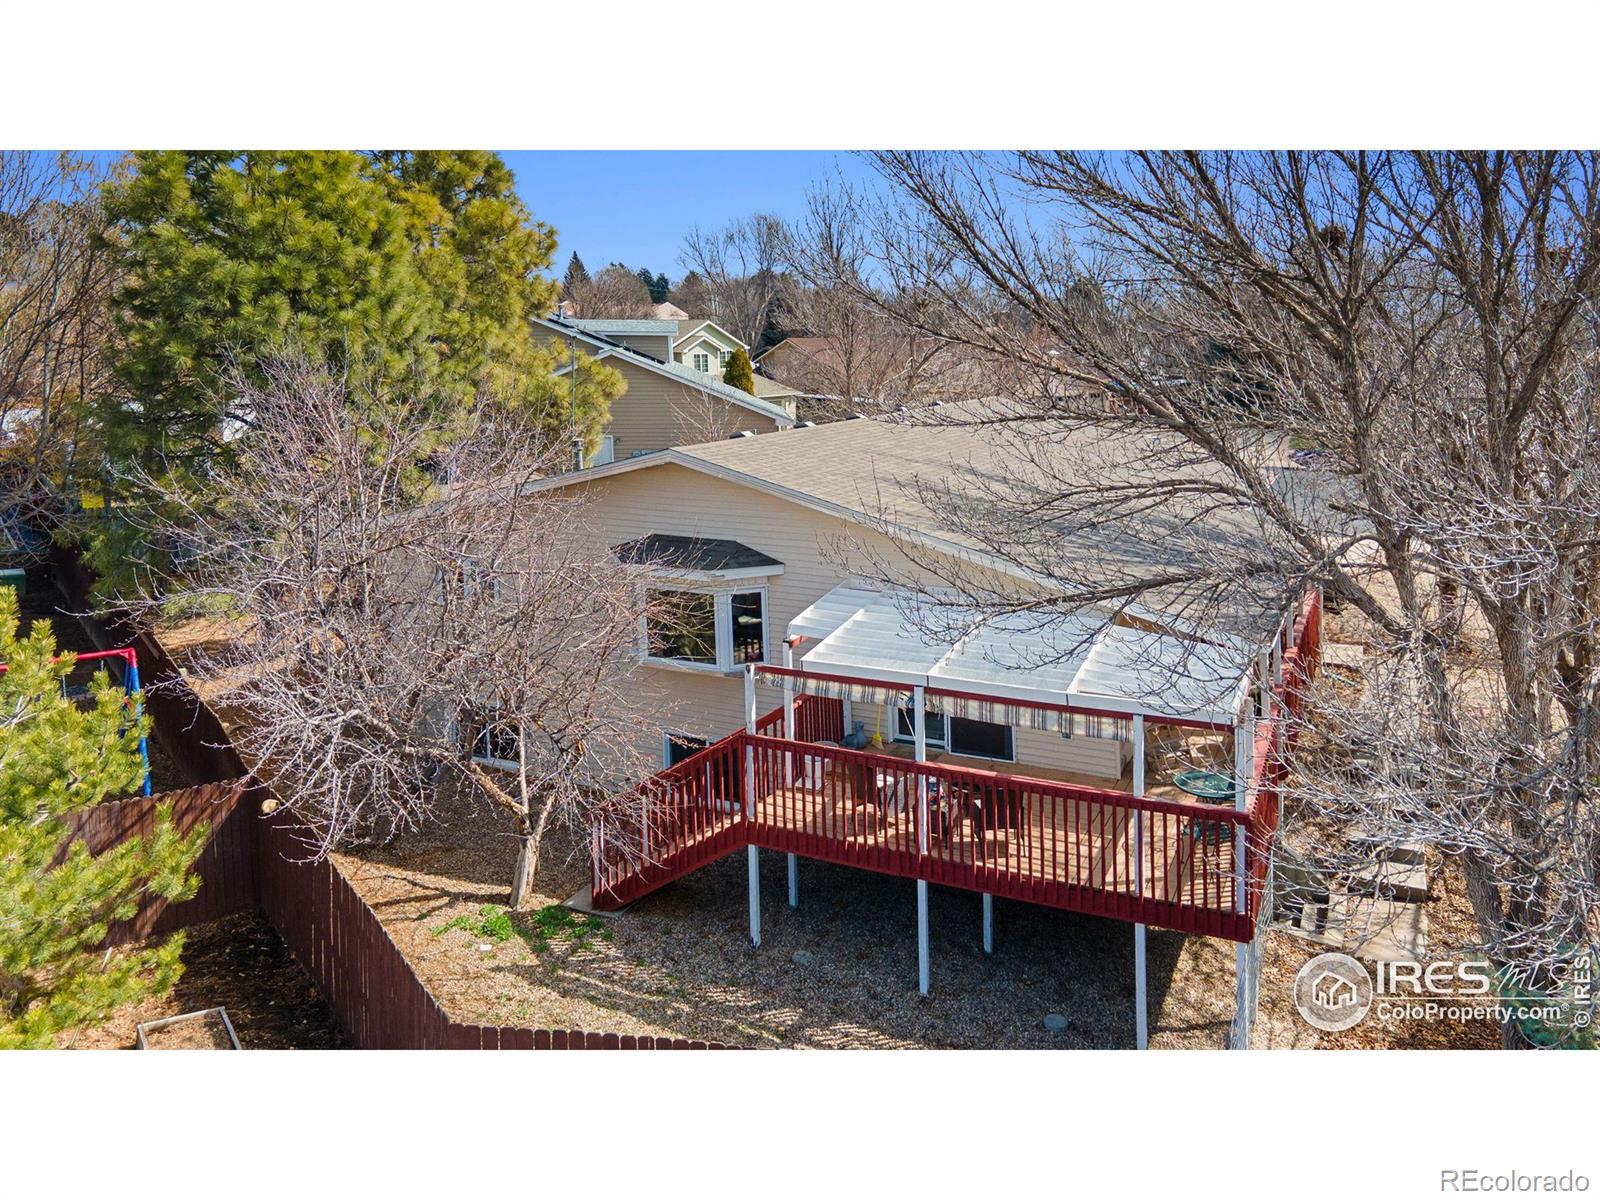 Report Image for 1118  Chester Court,Johnstown, Colorado